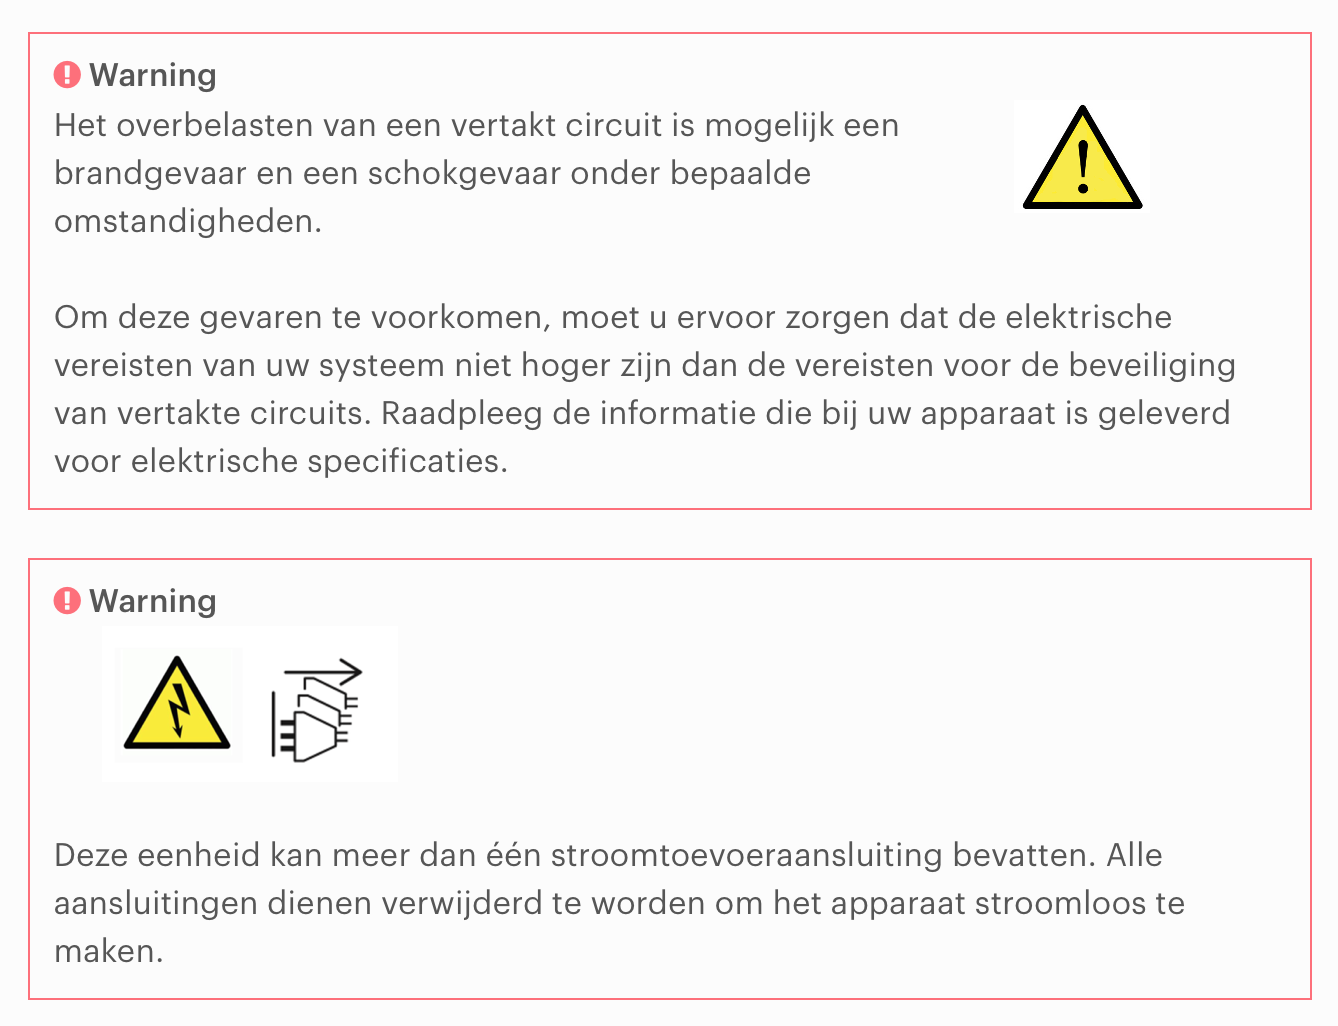 _images/nl_NL-warnings-2.png